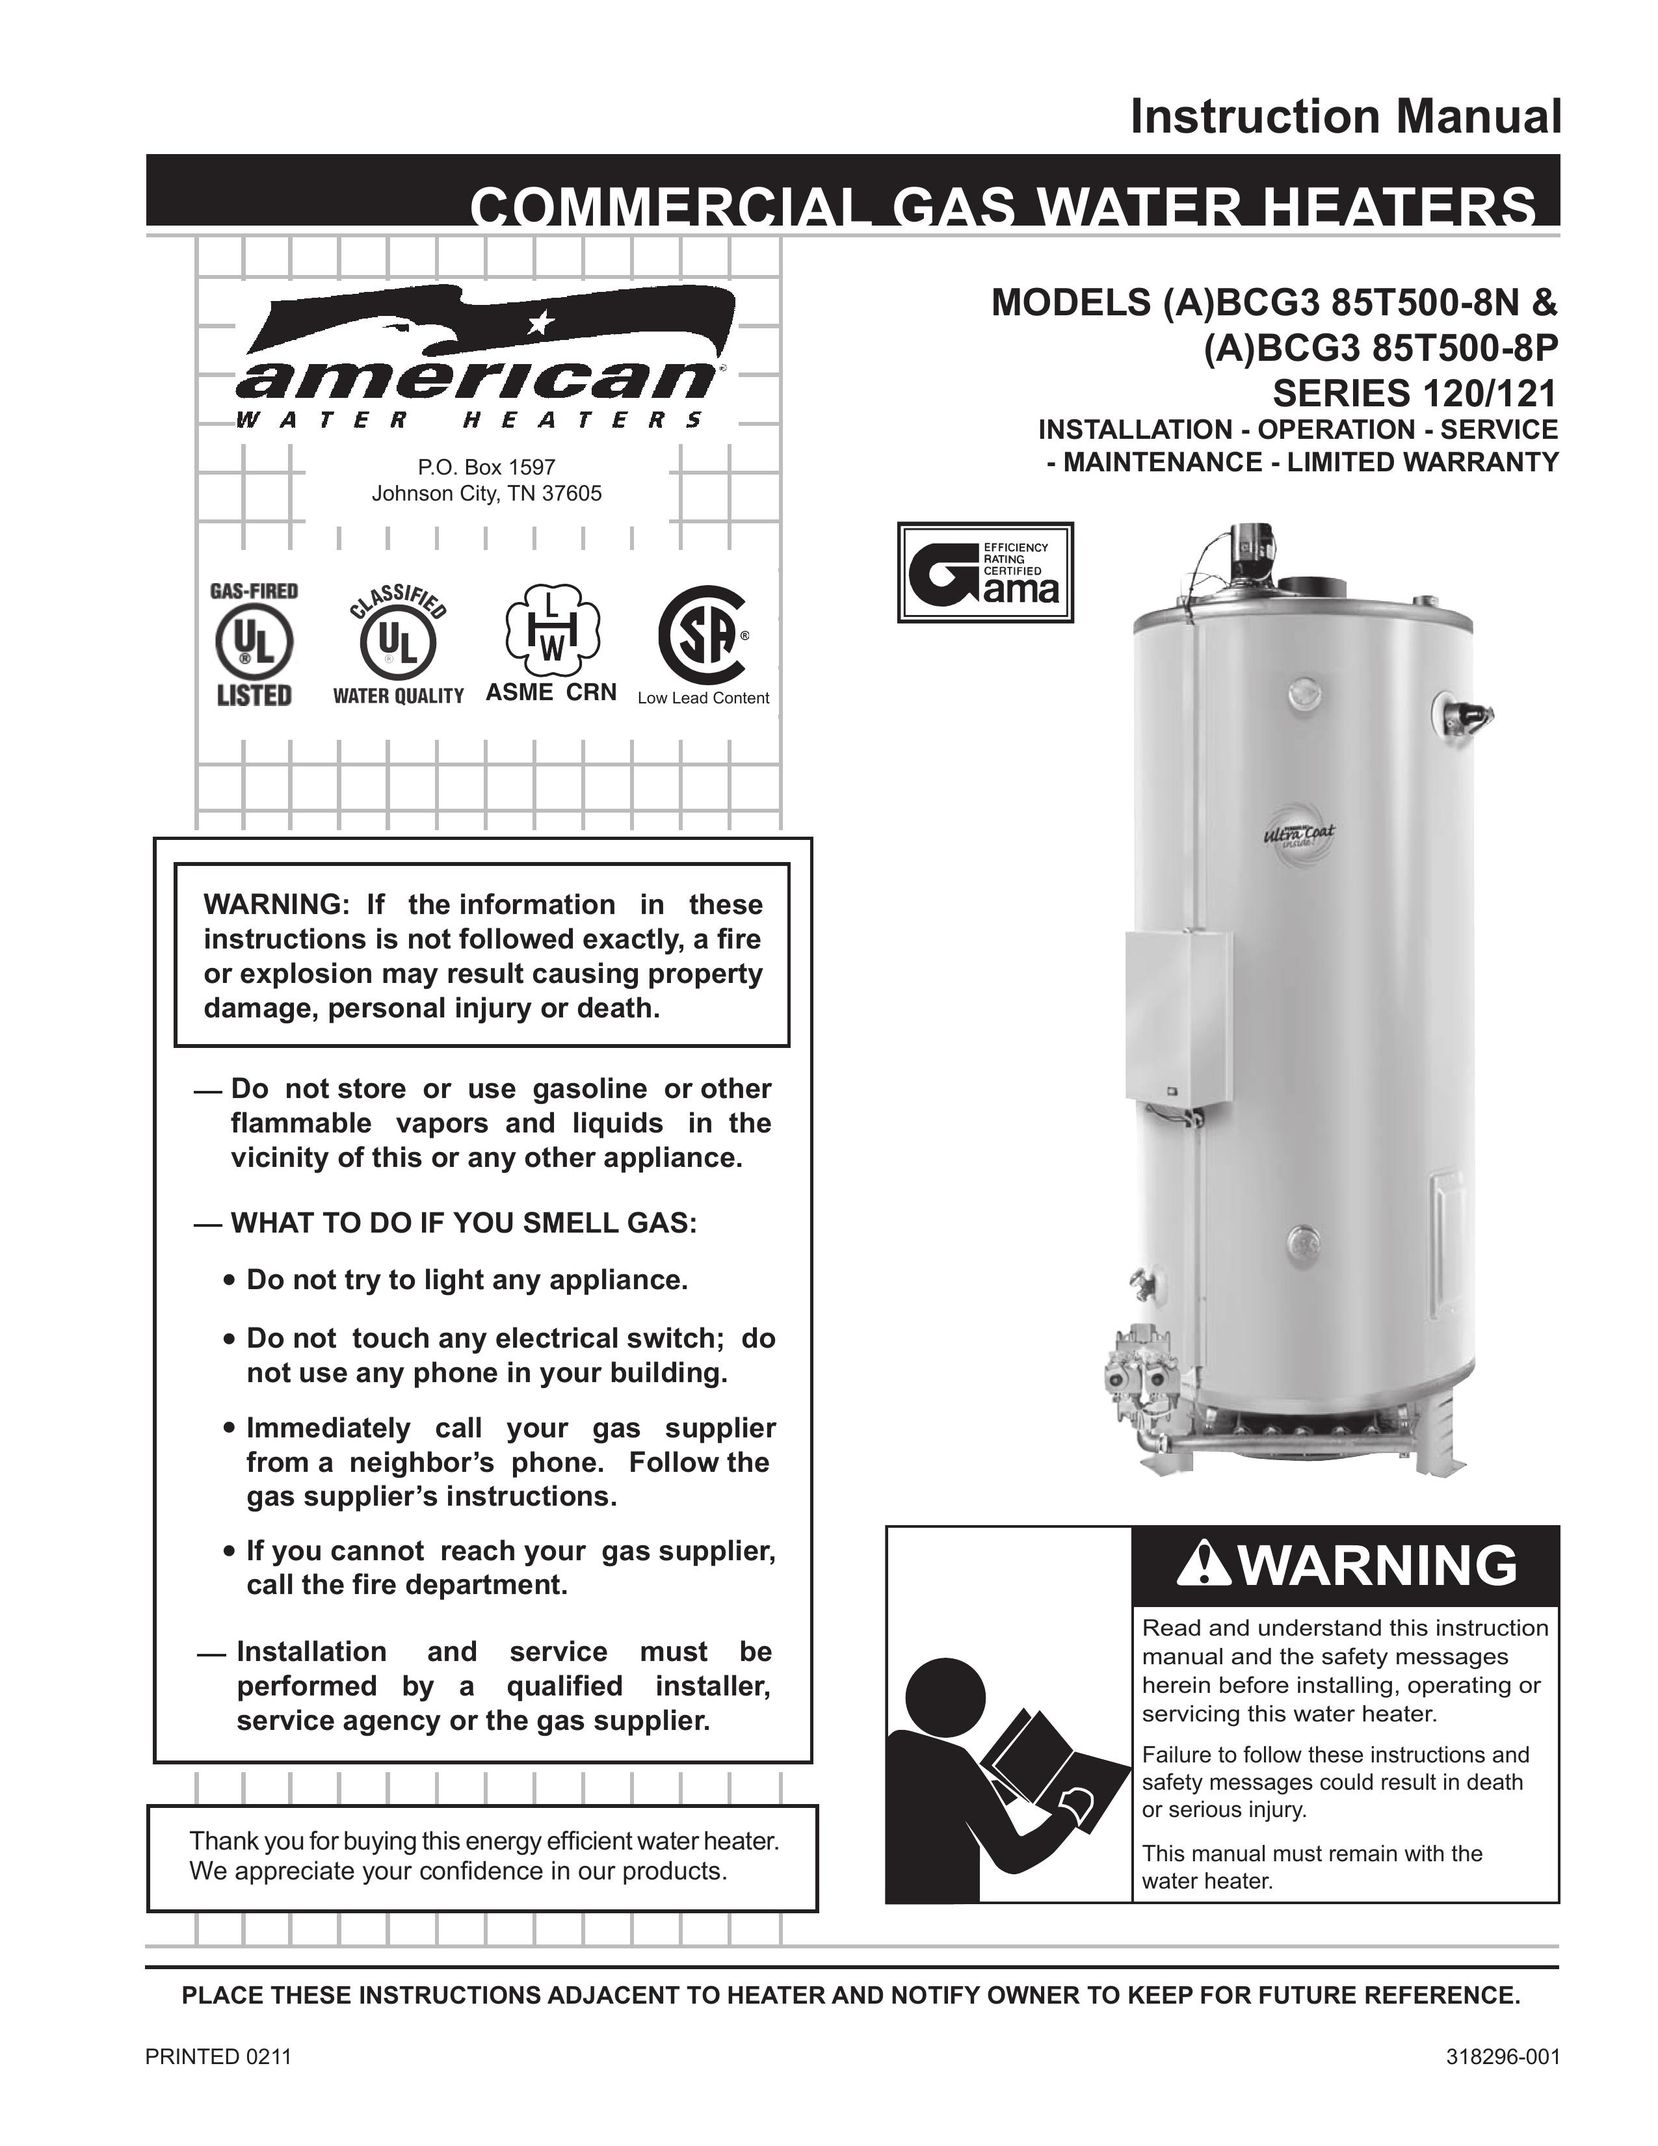 American Water Heater (A)BCG3 85T500-8P Water Heater User Manual